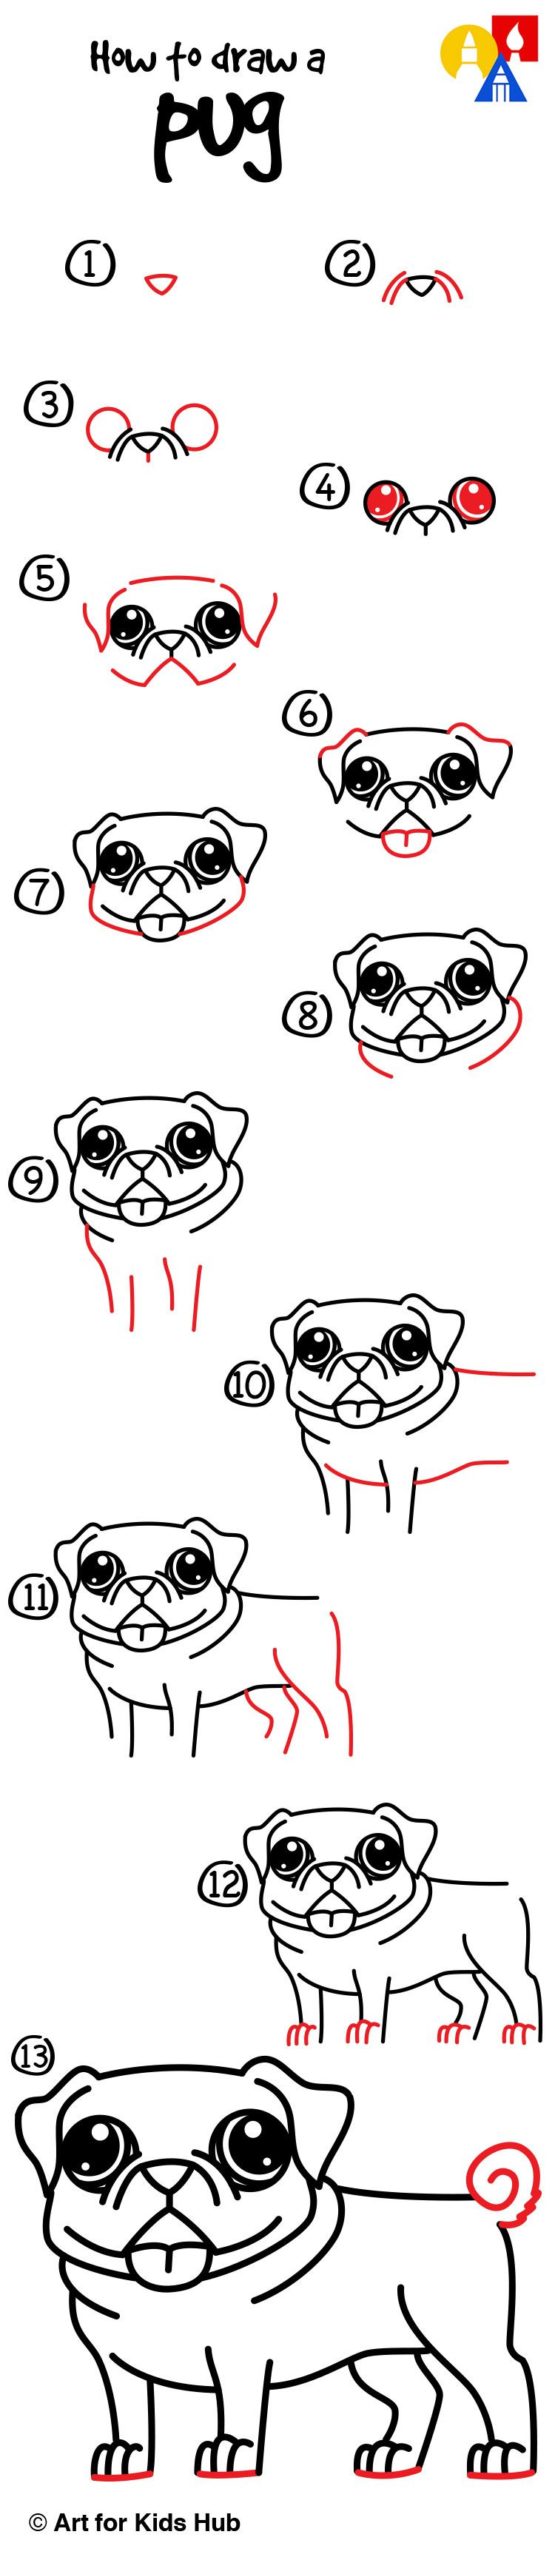 How To Draw A Pug - Art For Kids Hub -